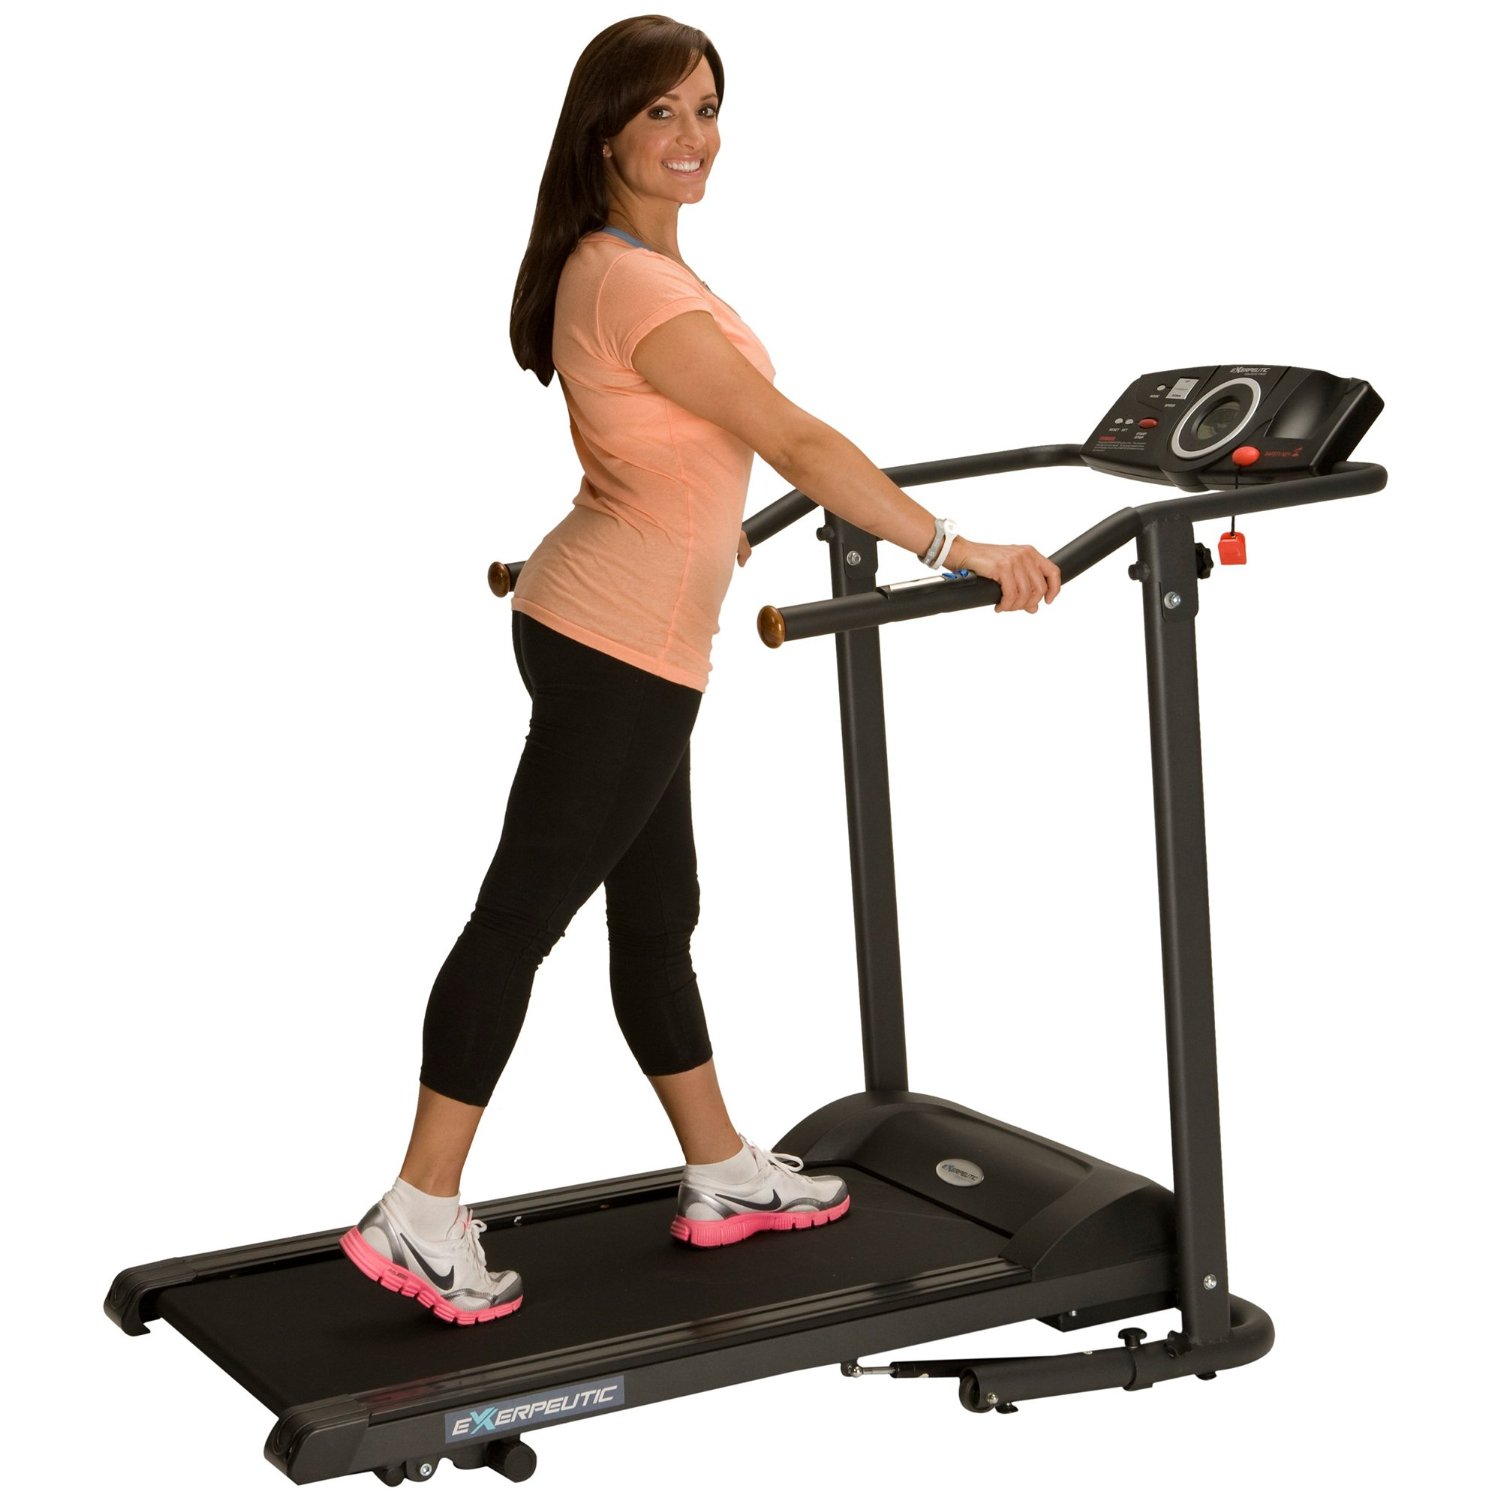 Is walking on a treadmill with an incline bad when you are overweight?